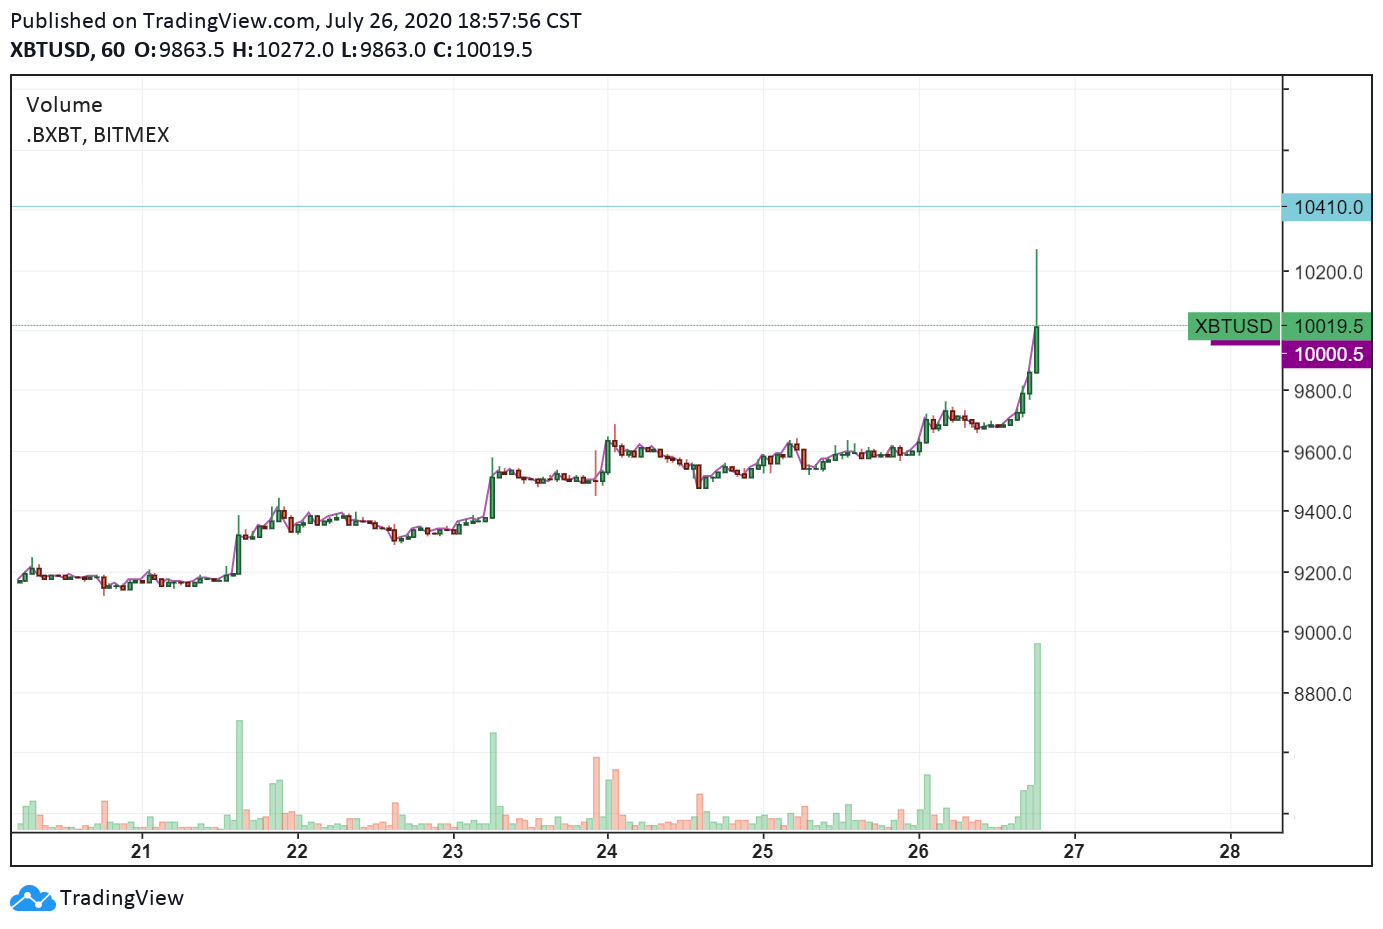 The hourly price chart of Bitcoin